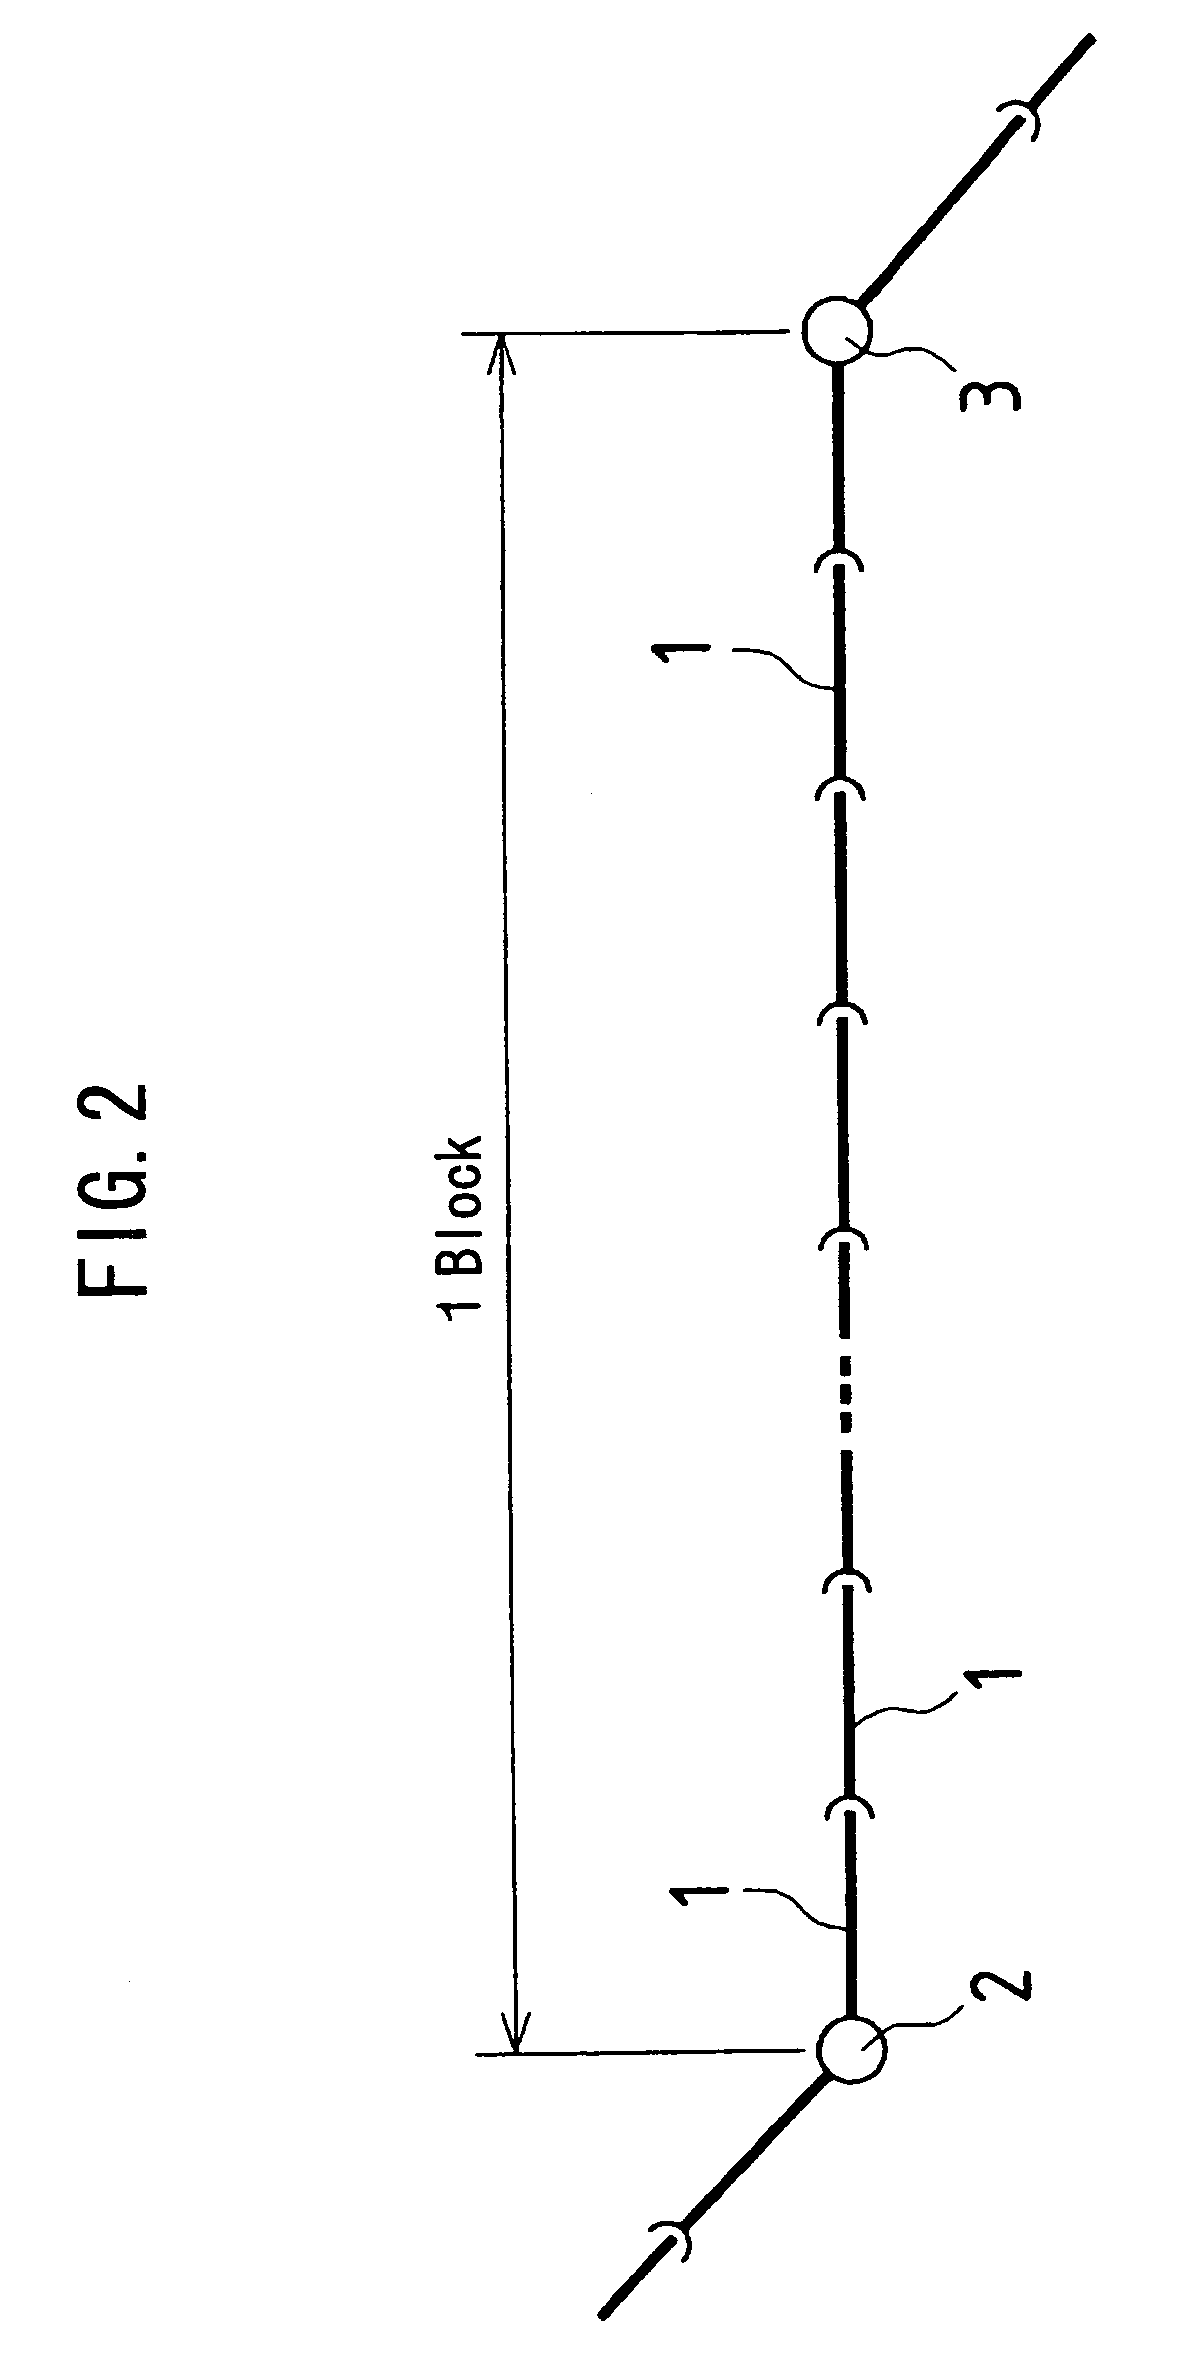 Method and equipment for inspecting reinforced concrete pipe